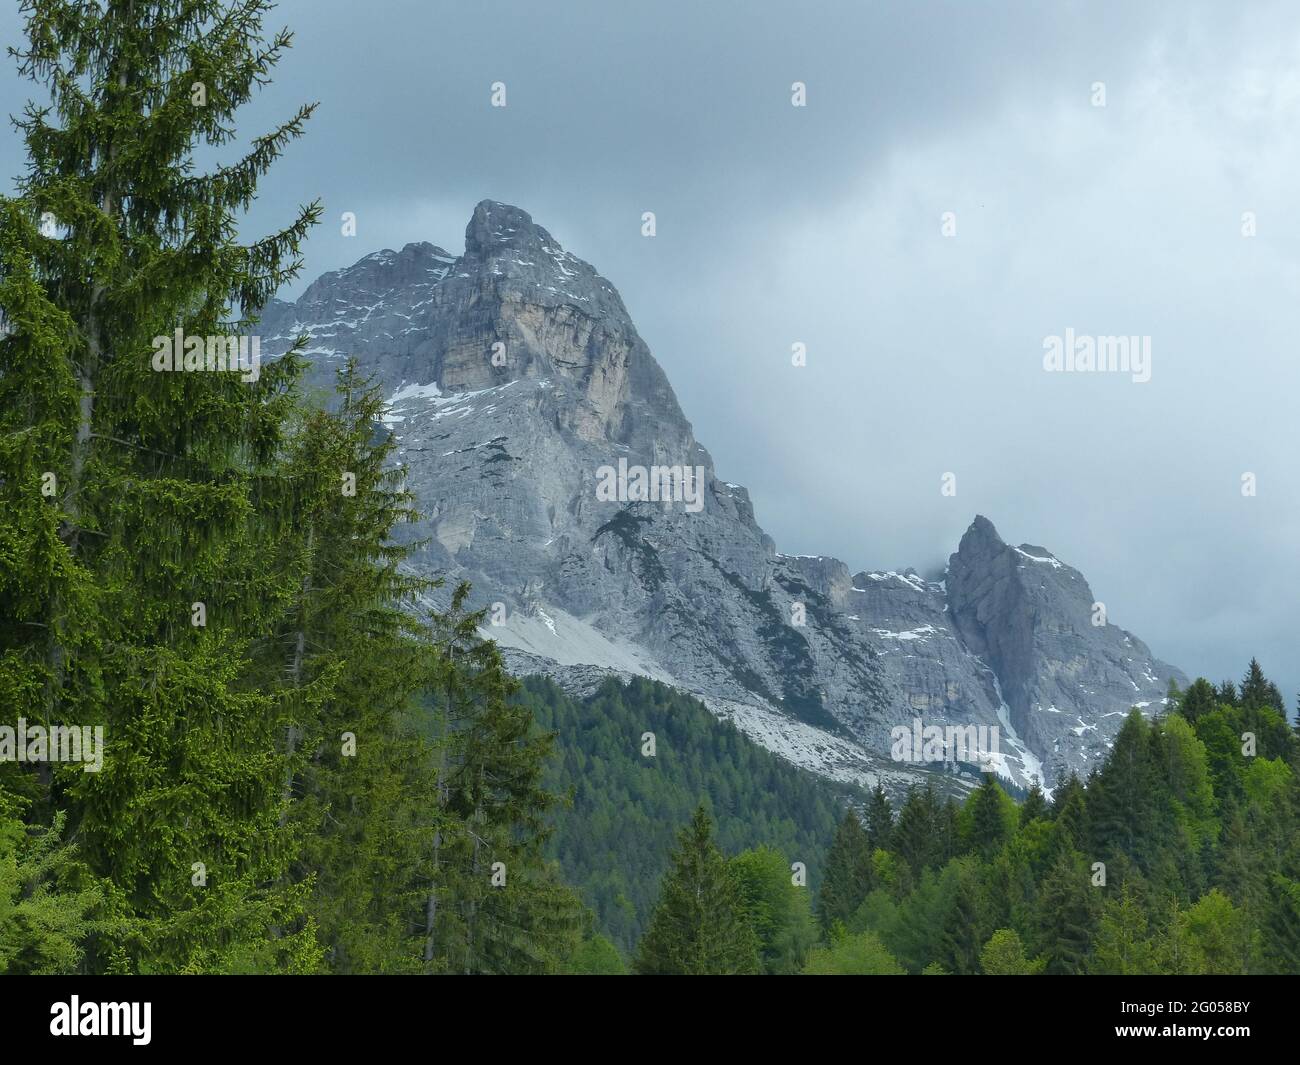 Amazing View of the Snow at Dolomites mountains In the Alps, Italy Stock Photo